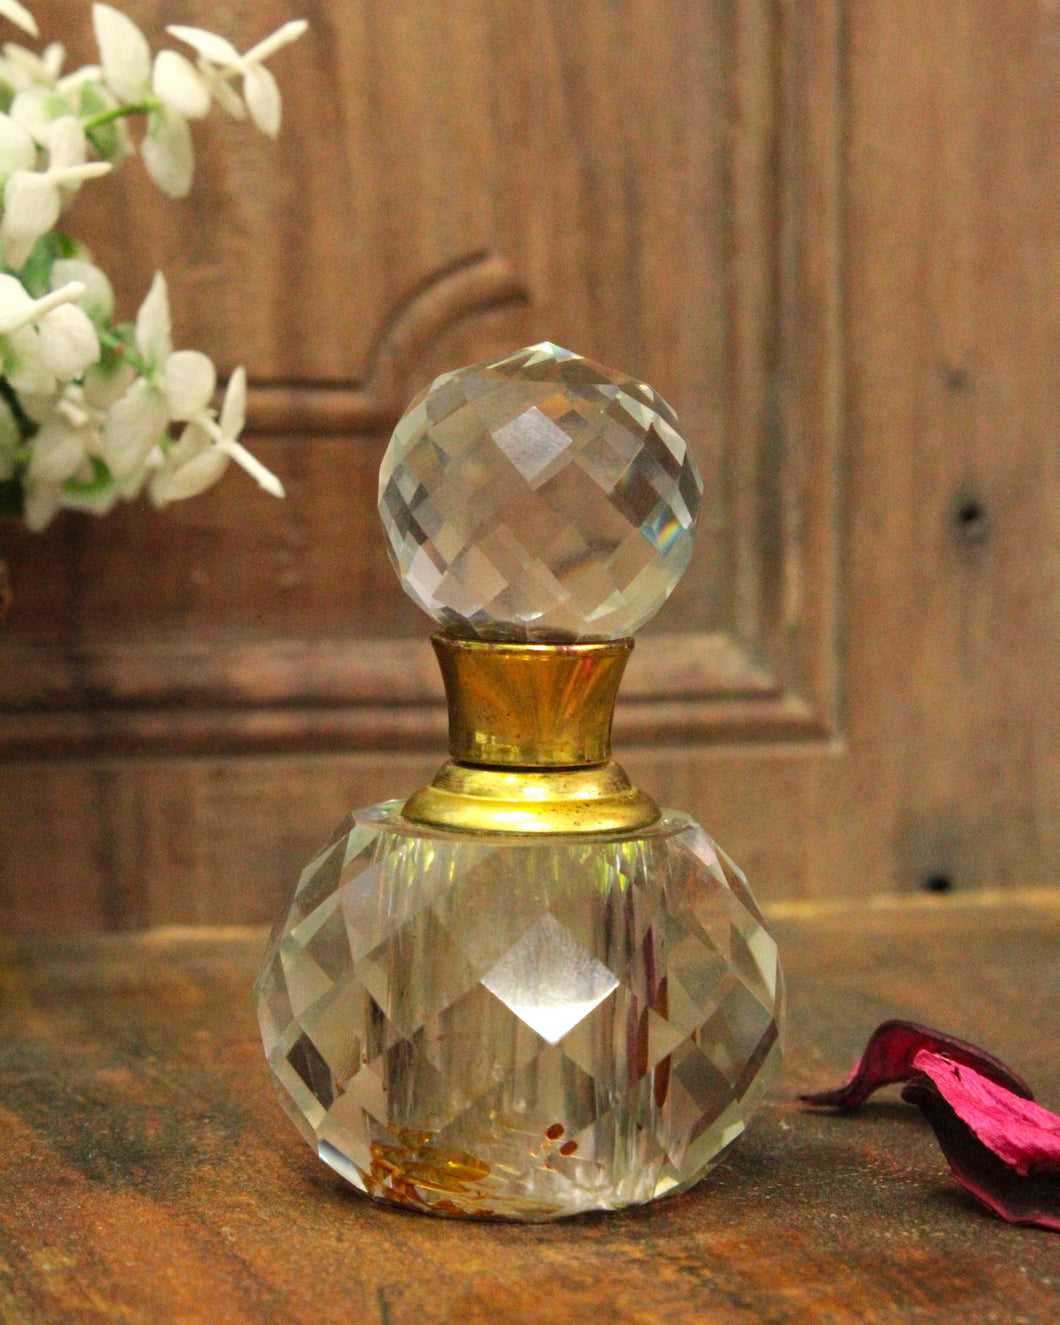 Elegance Embodied: Glass Attar/Perfume Bottle Collection